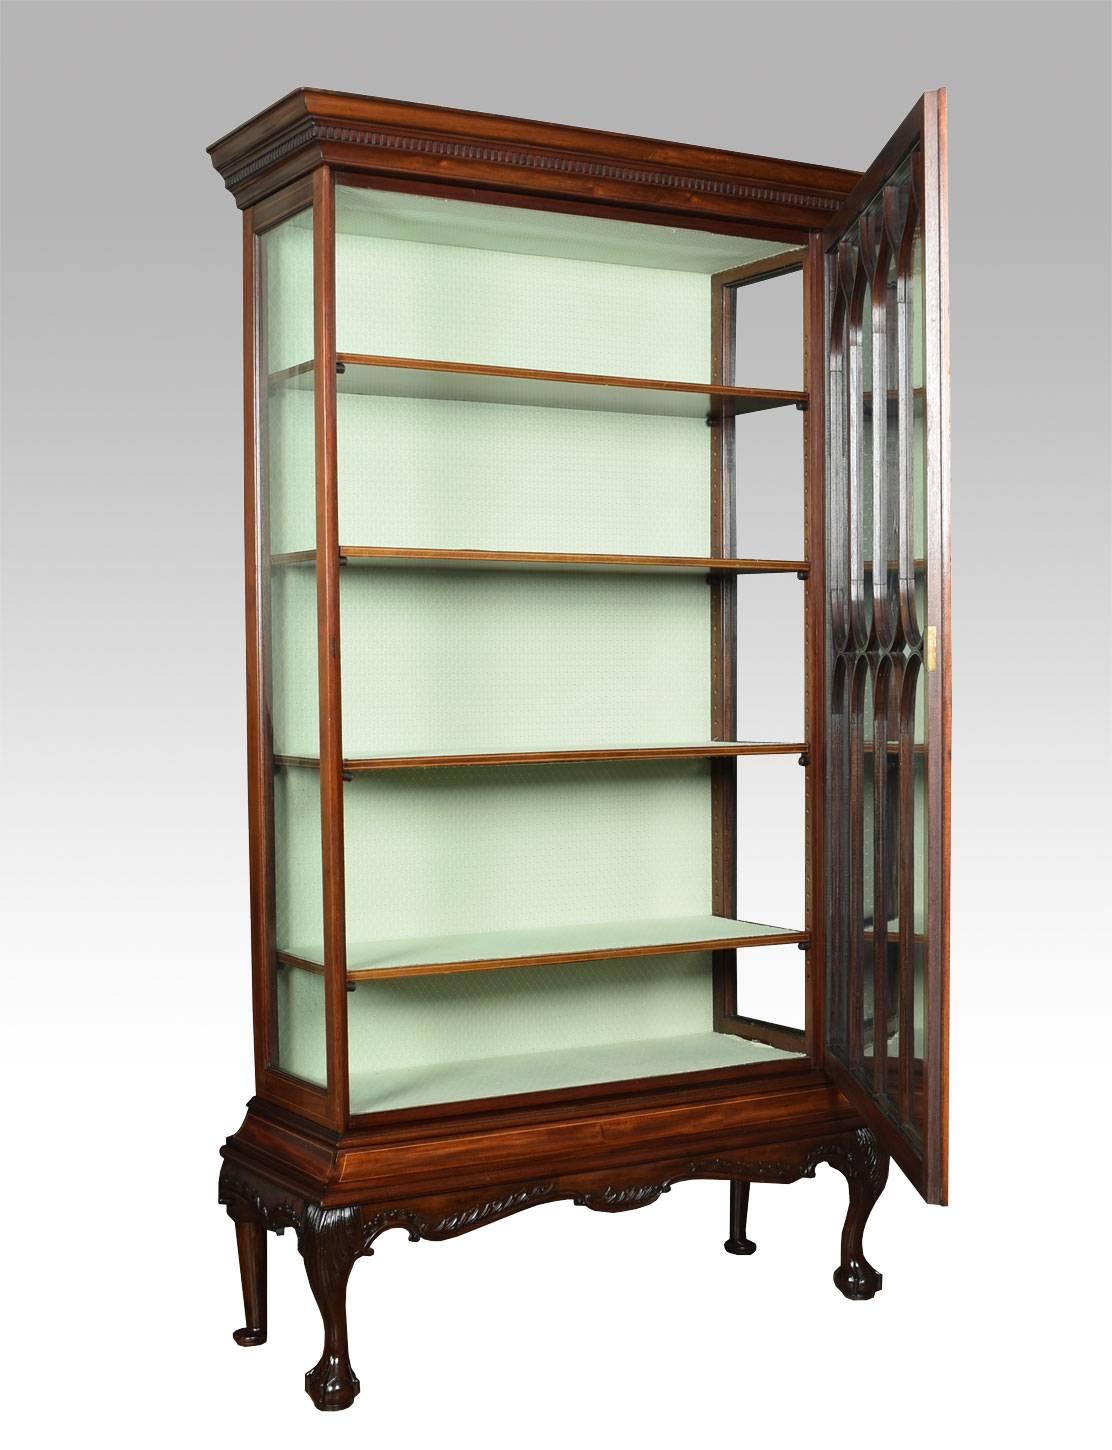 Large Chippendale revival single door string inlaid display cabinet, the dental moulded cornice above large single glazed door opening to reveal four adjustable shelves the display cabinet is raised up on claw and ball cabriole front legs with